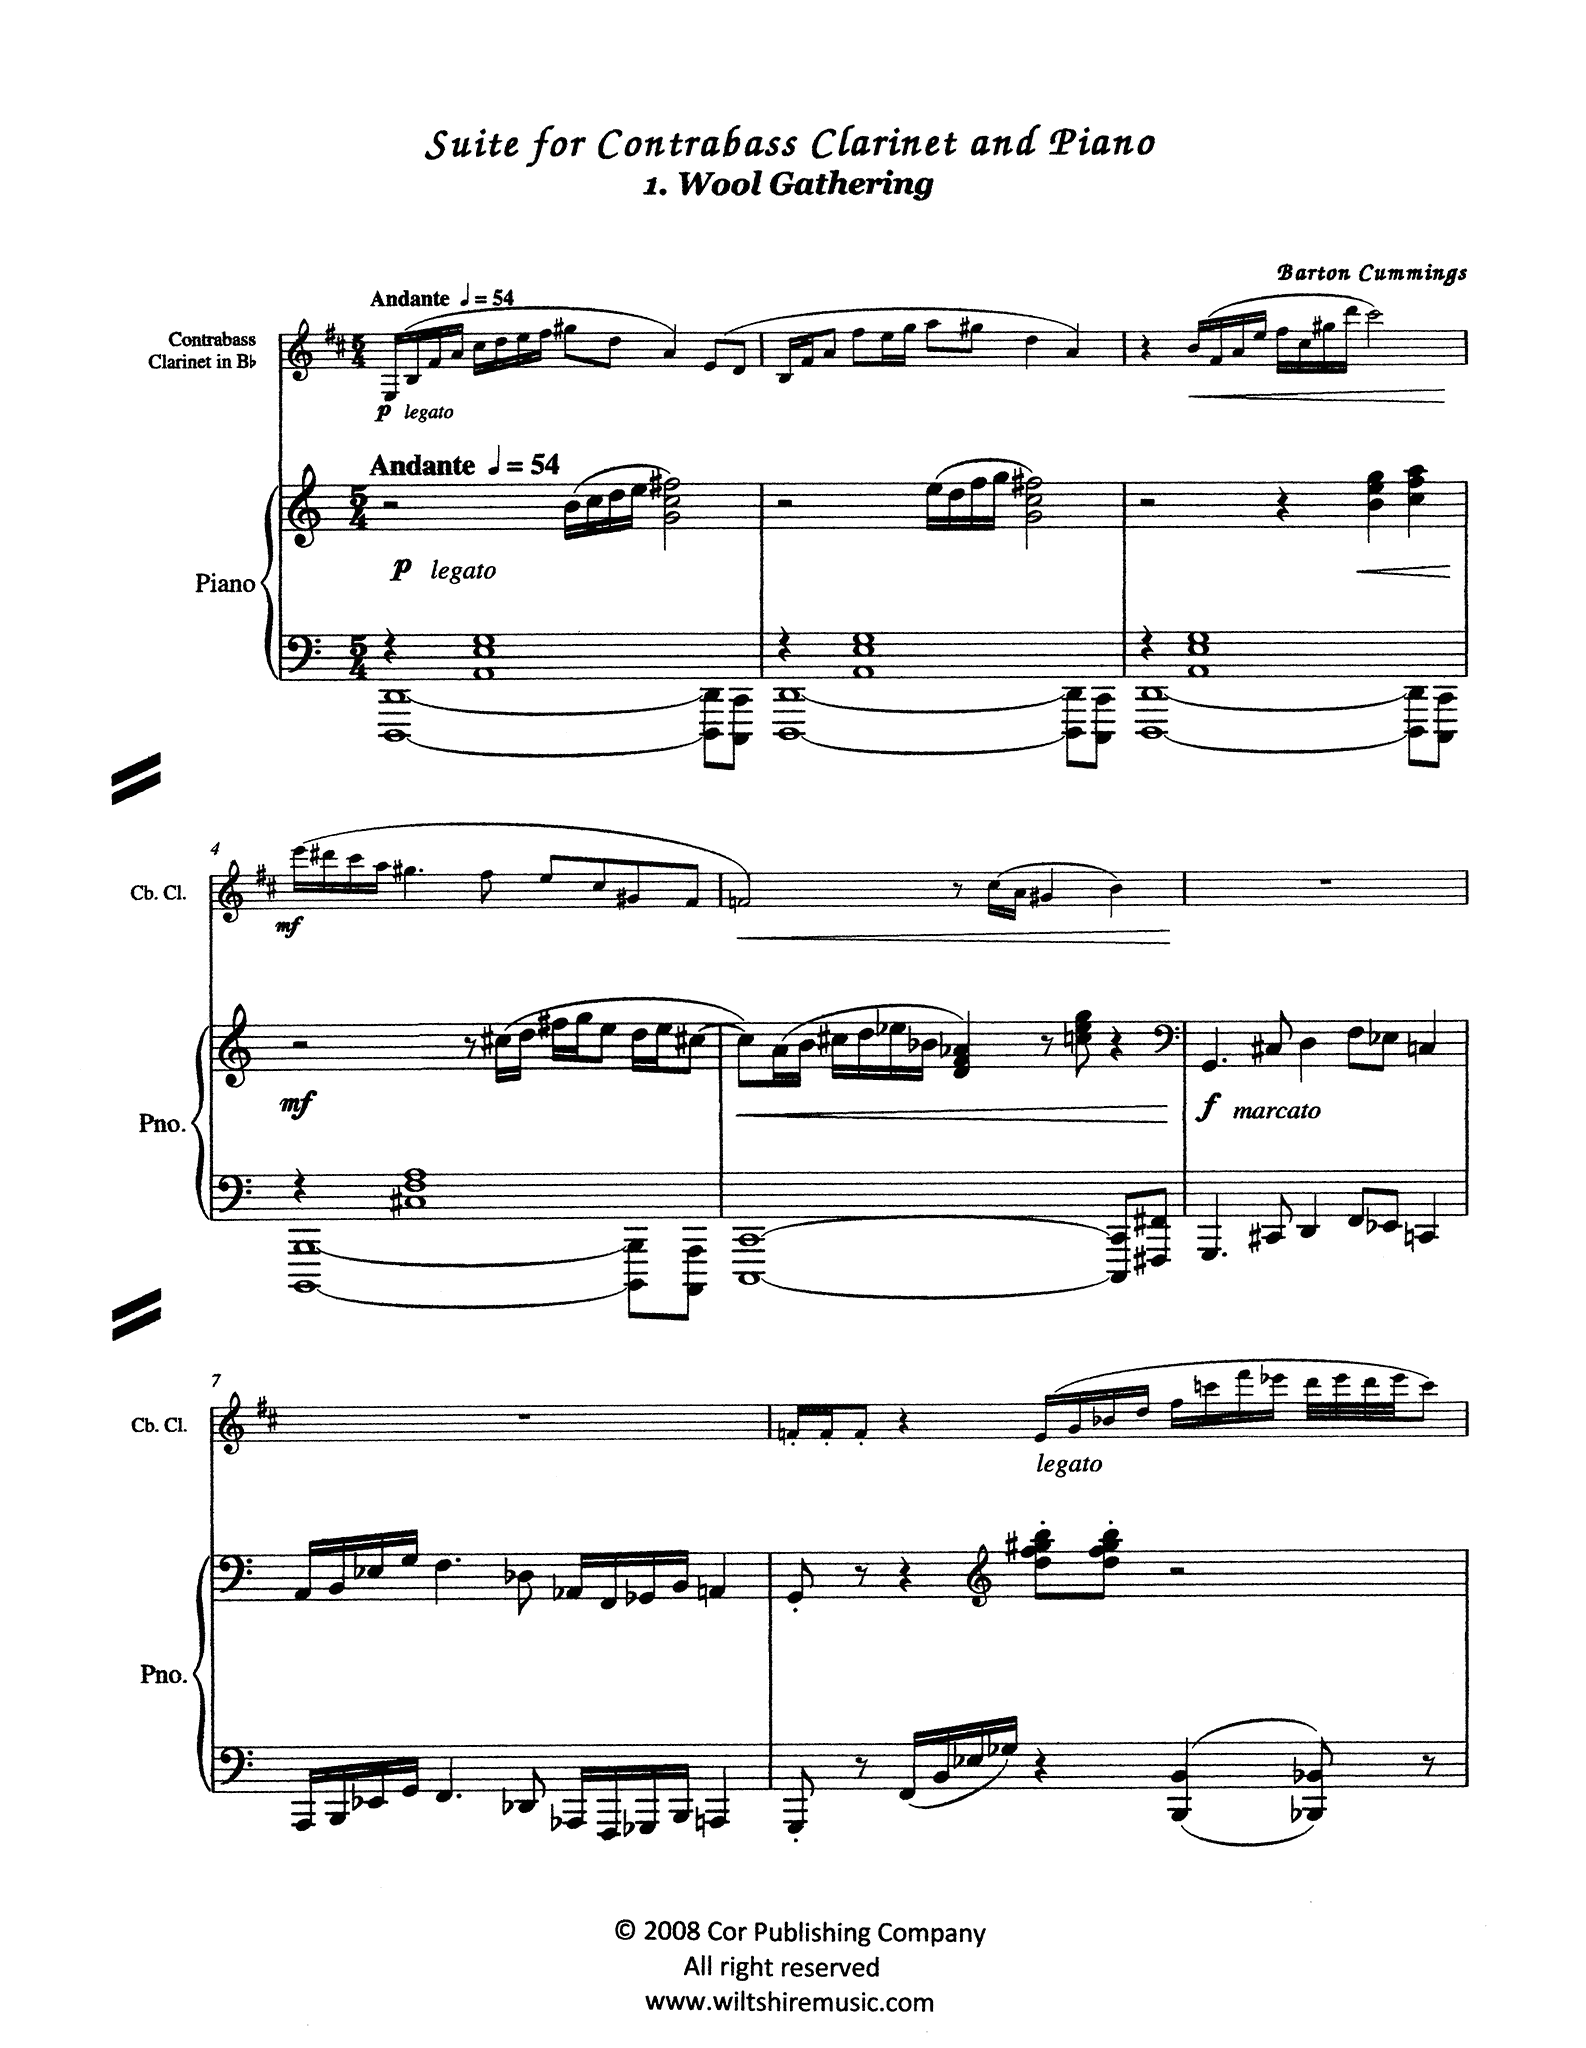 Barton Cummings Suite Contrabass Clarinet and Piano - Movement 1